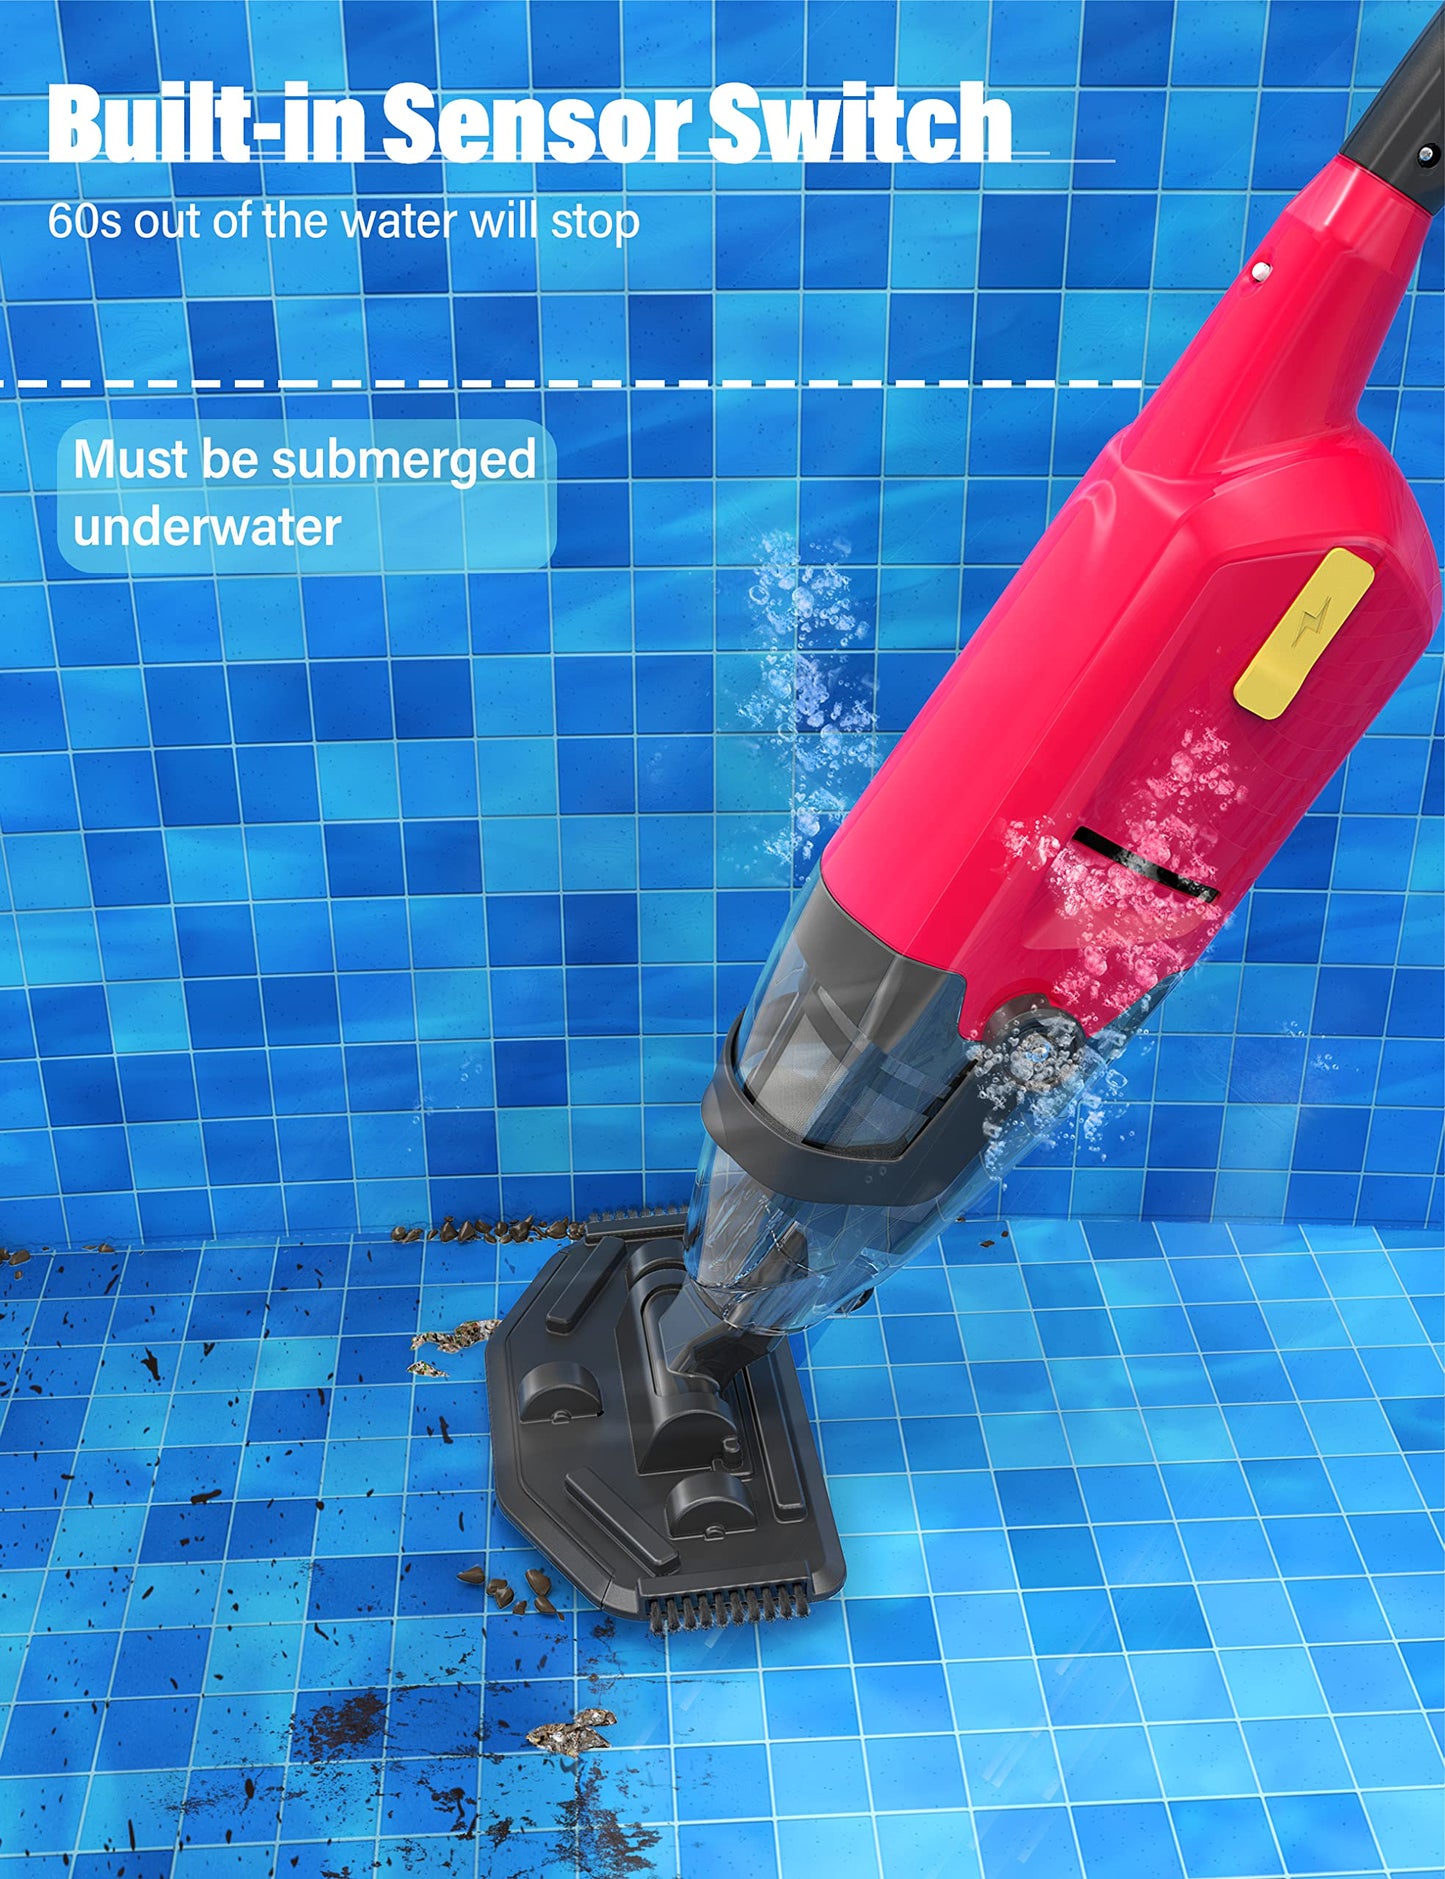 Efurden Handheld Pool Vacuum, Rechargeable Pool Cleaner with Running Time up to 60-Minutes Ideal for Above Ground Pools, Spas and Hot Tub for Sand and Debris, Carmine Rose red